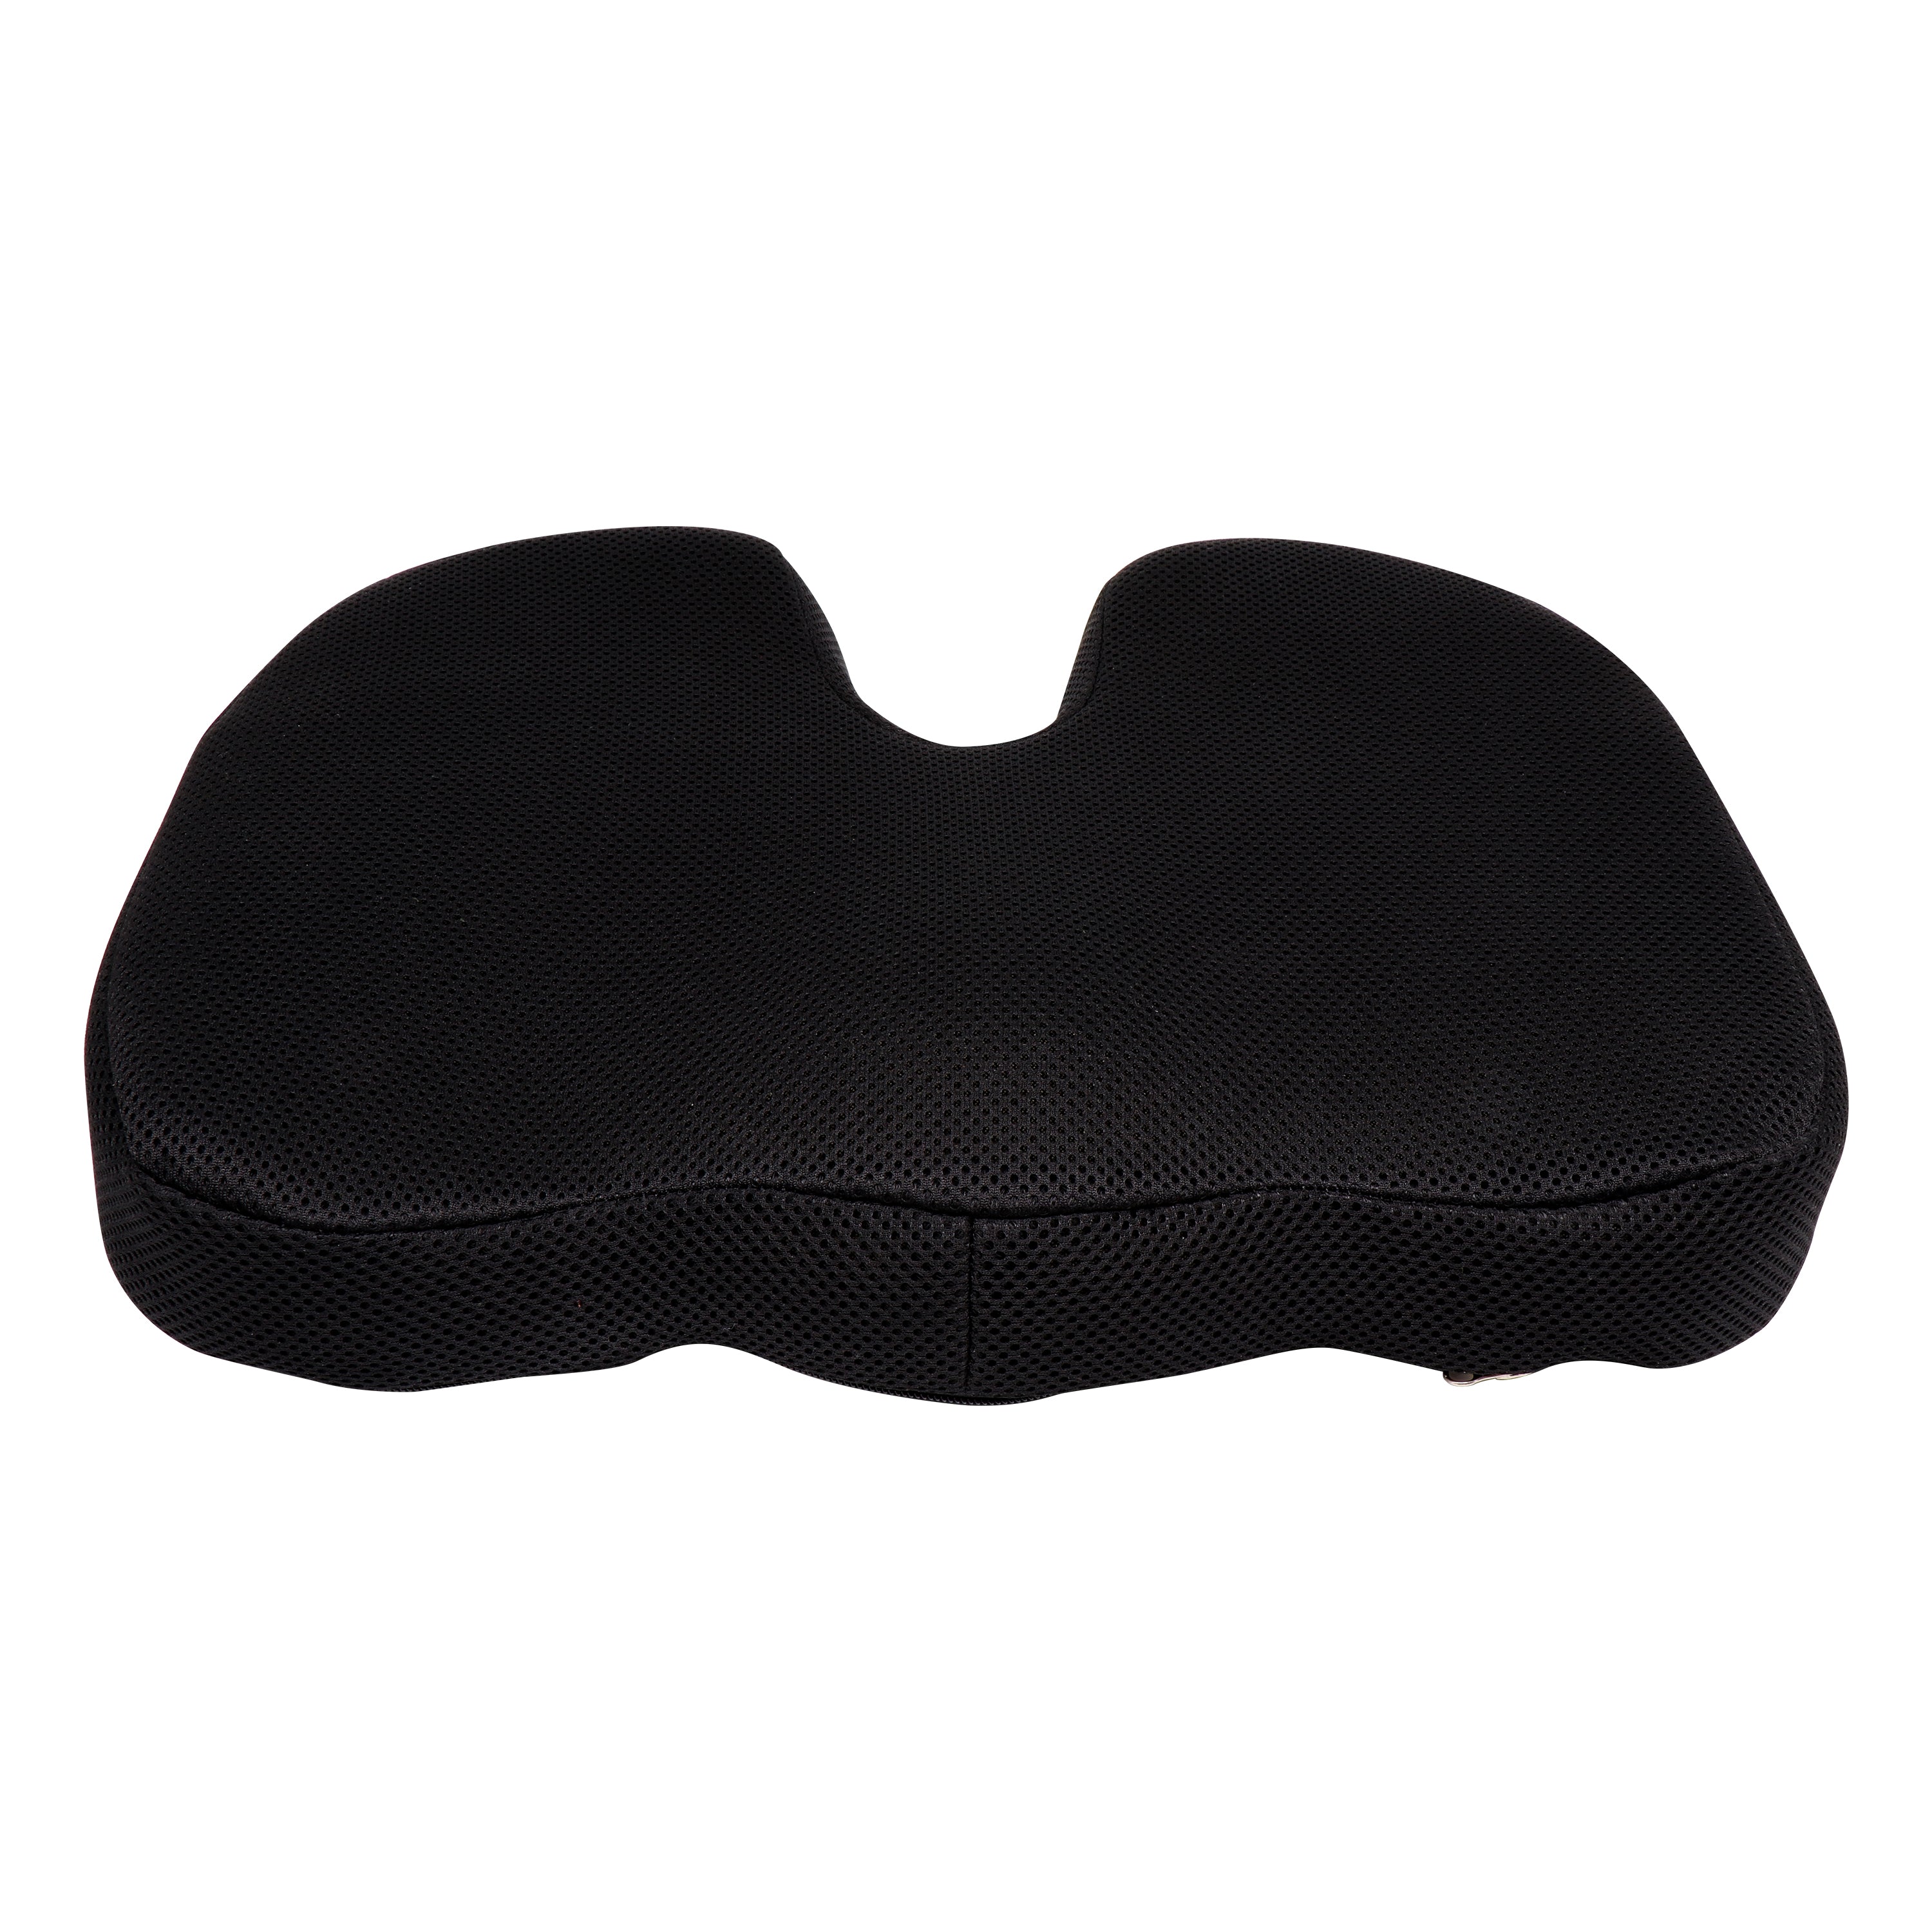 U Shaped Coccyx Orthopedic Foam Seat Cushion for Relief from Sciatica and Hip Pain - Mesh Black